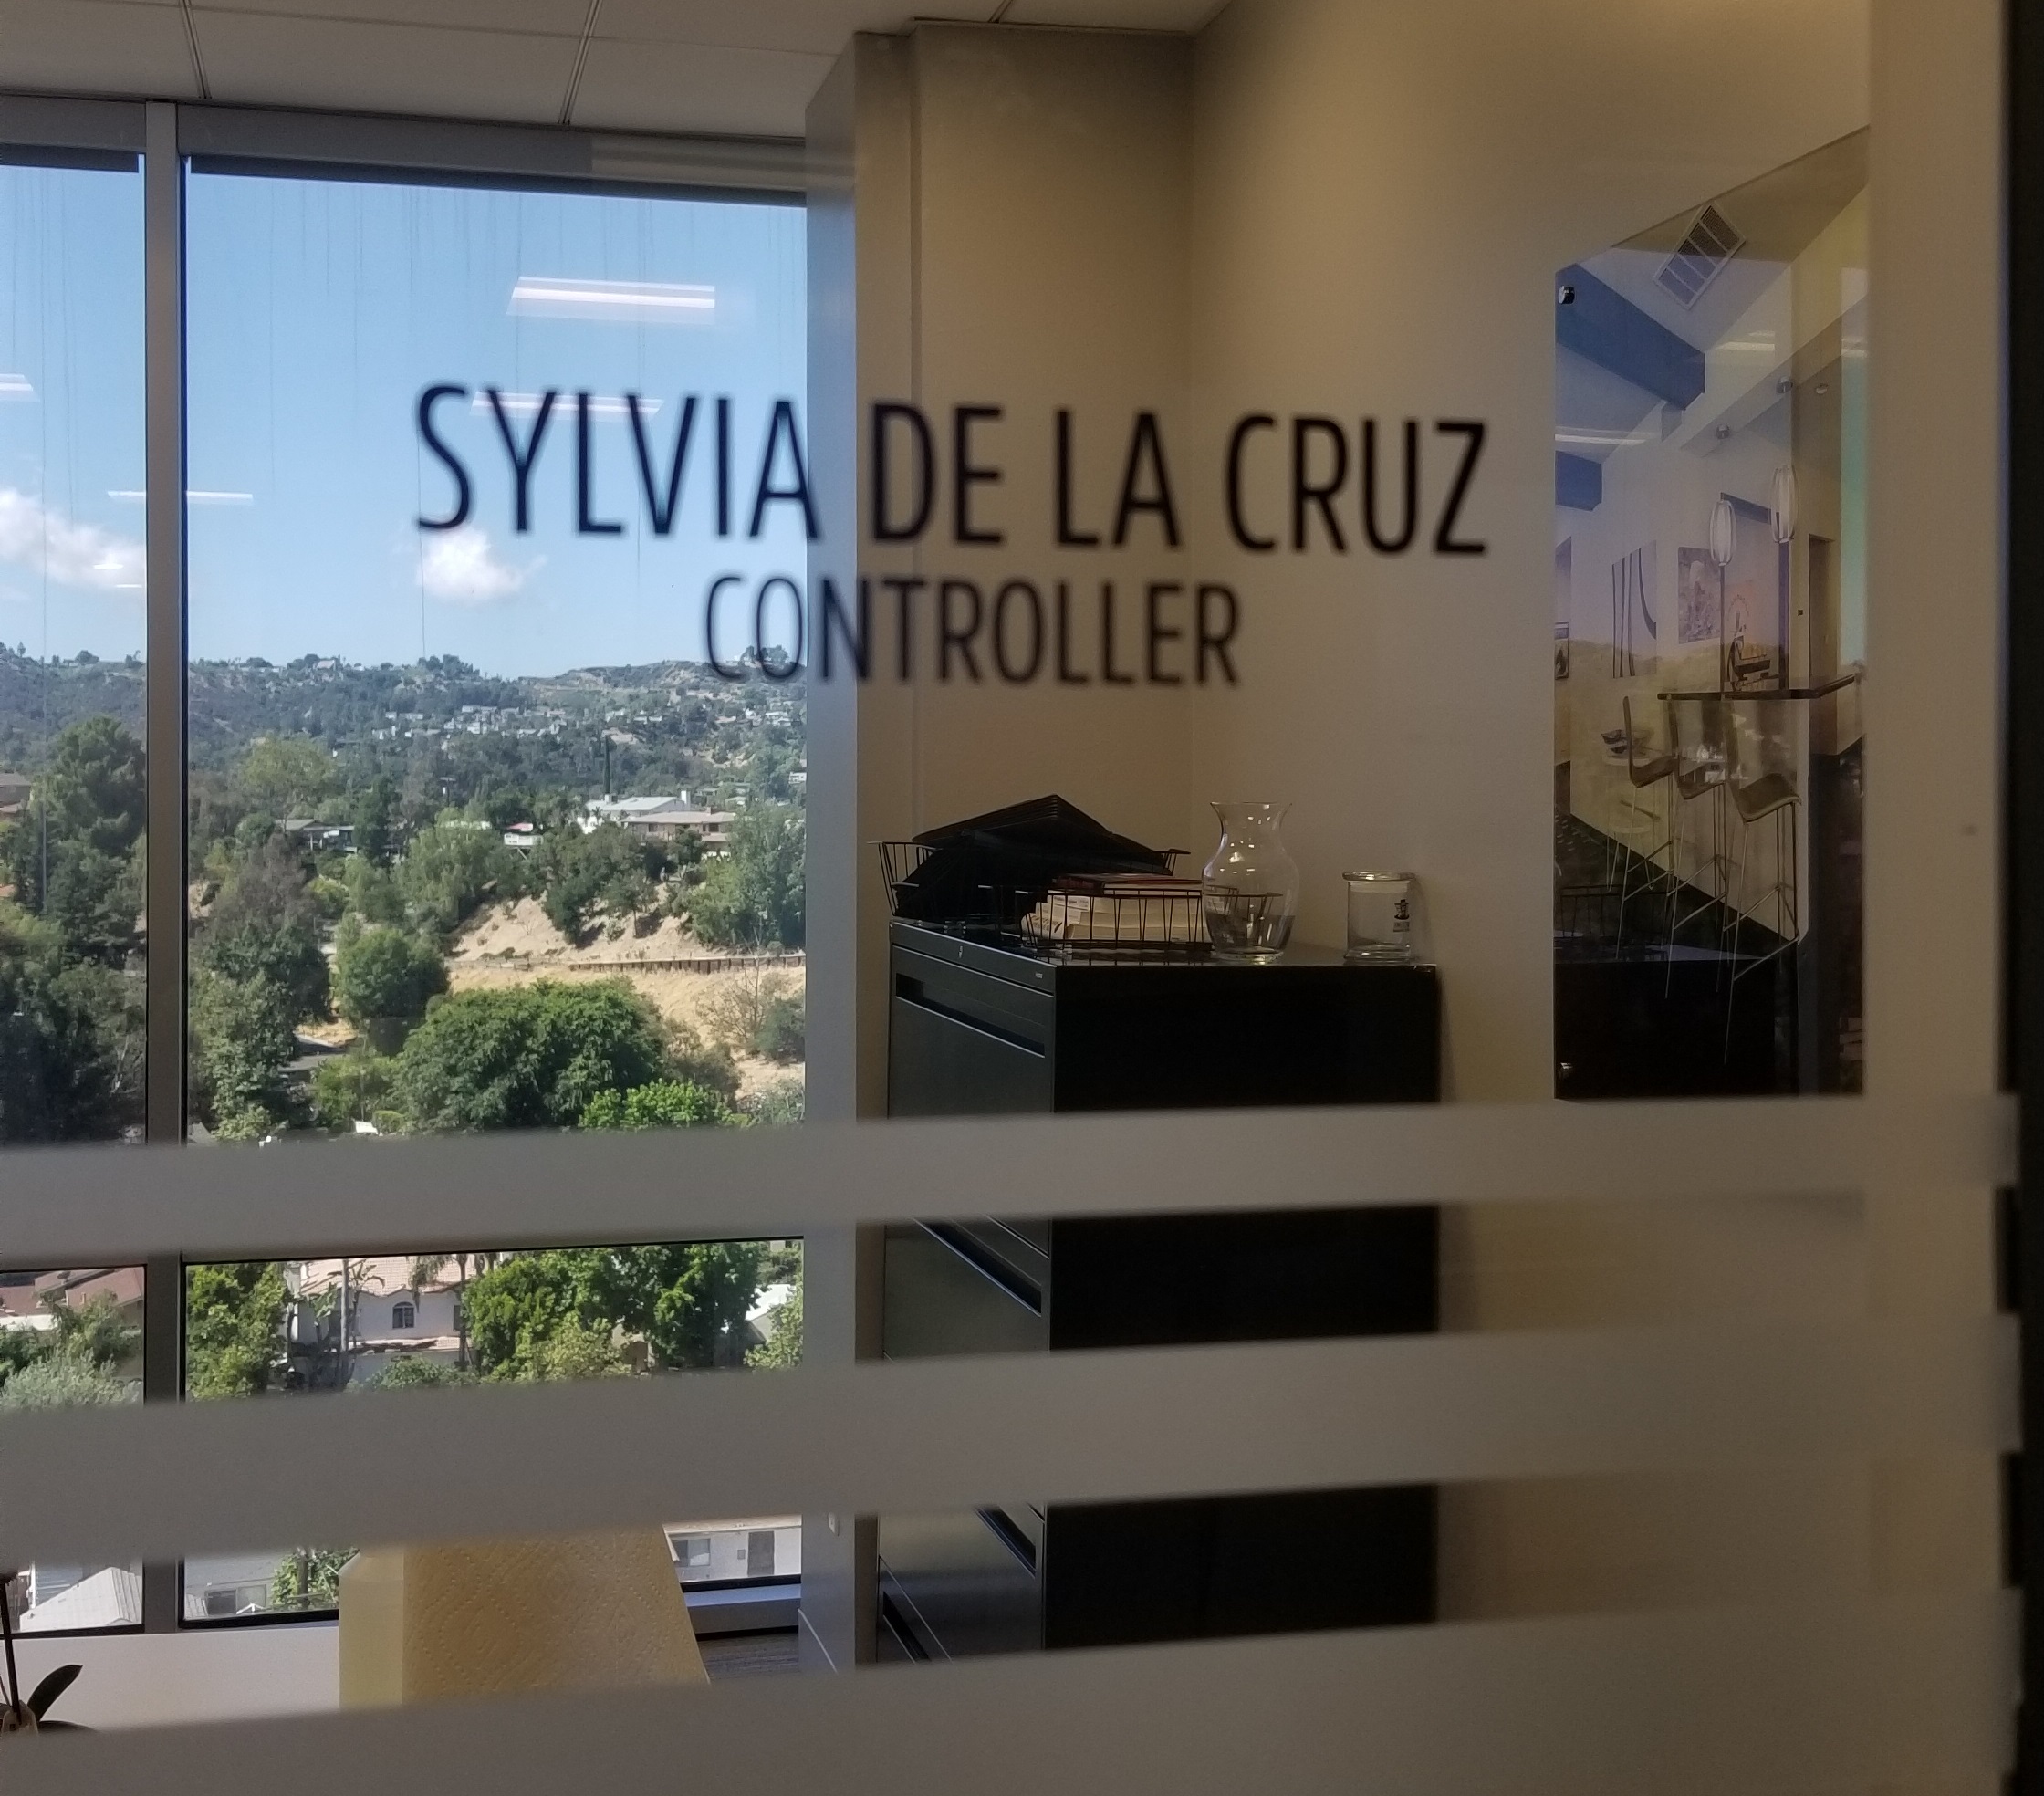 Part of the ongoing Jones and Jones Woodland Hills branch sign package, every office also got employee name office window graphics.